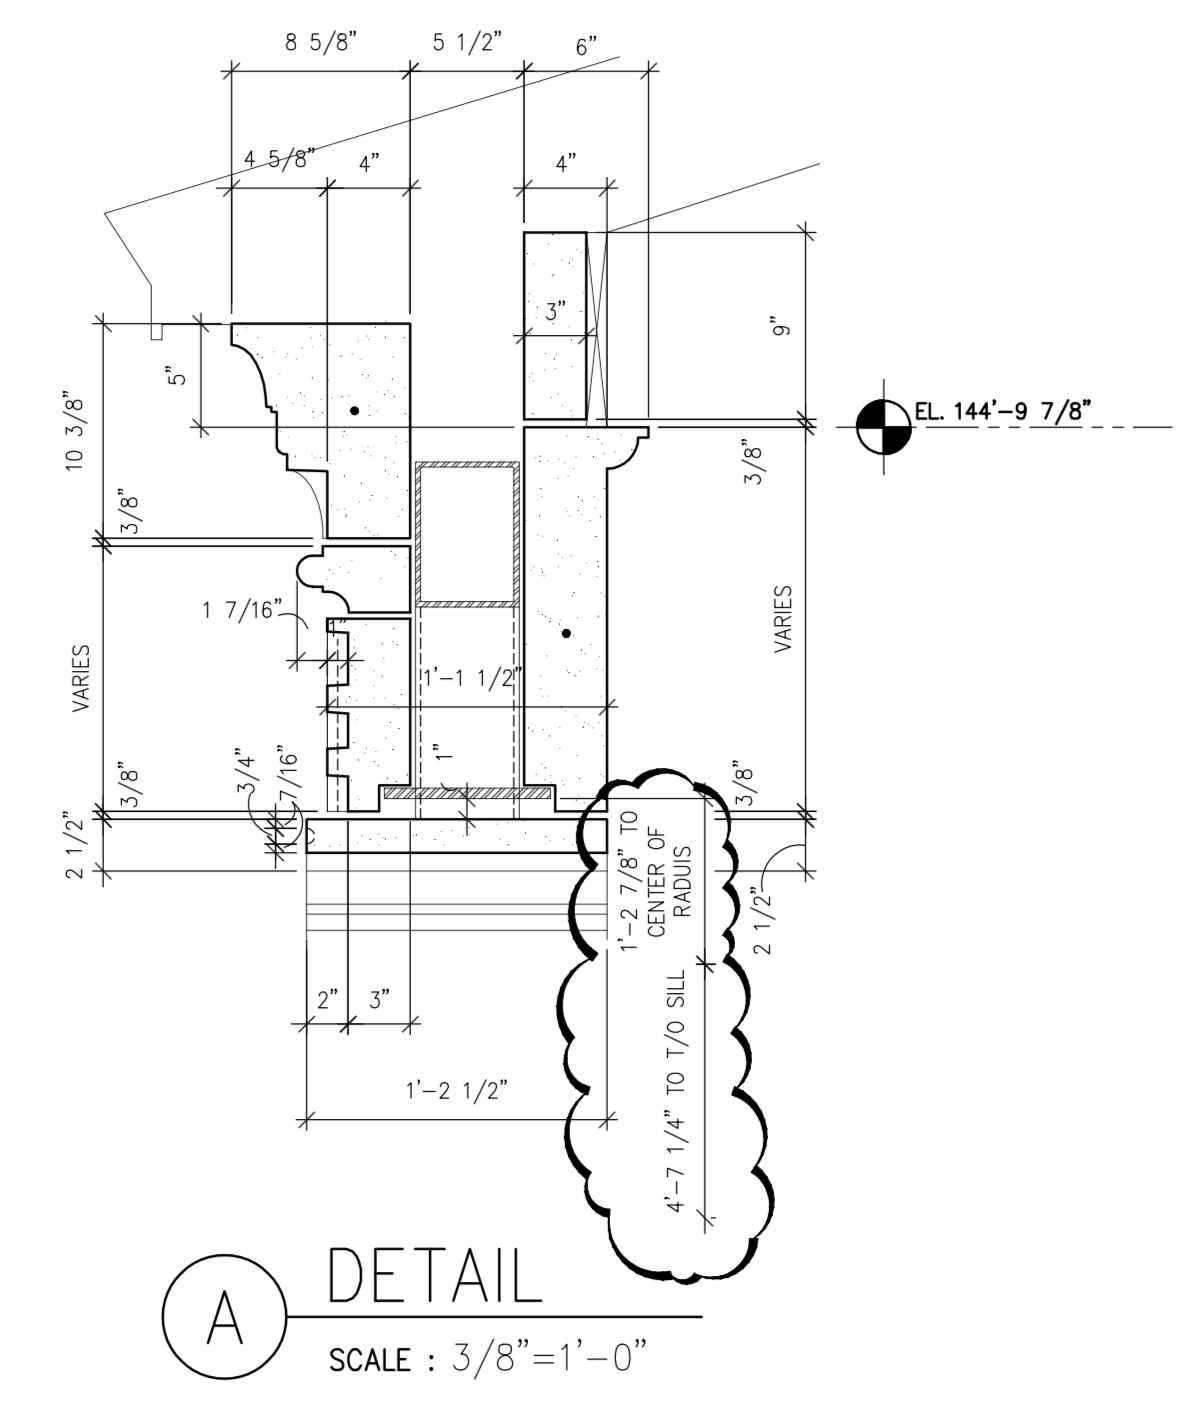 Shop Drawing - Details for Support, Anchorage, Installation Connections